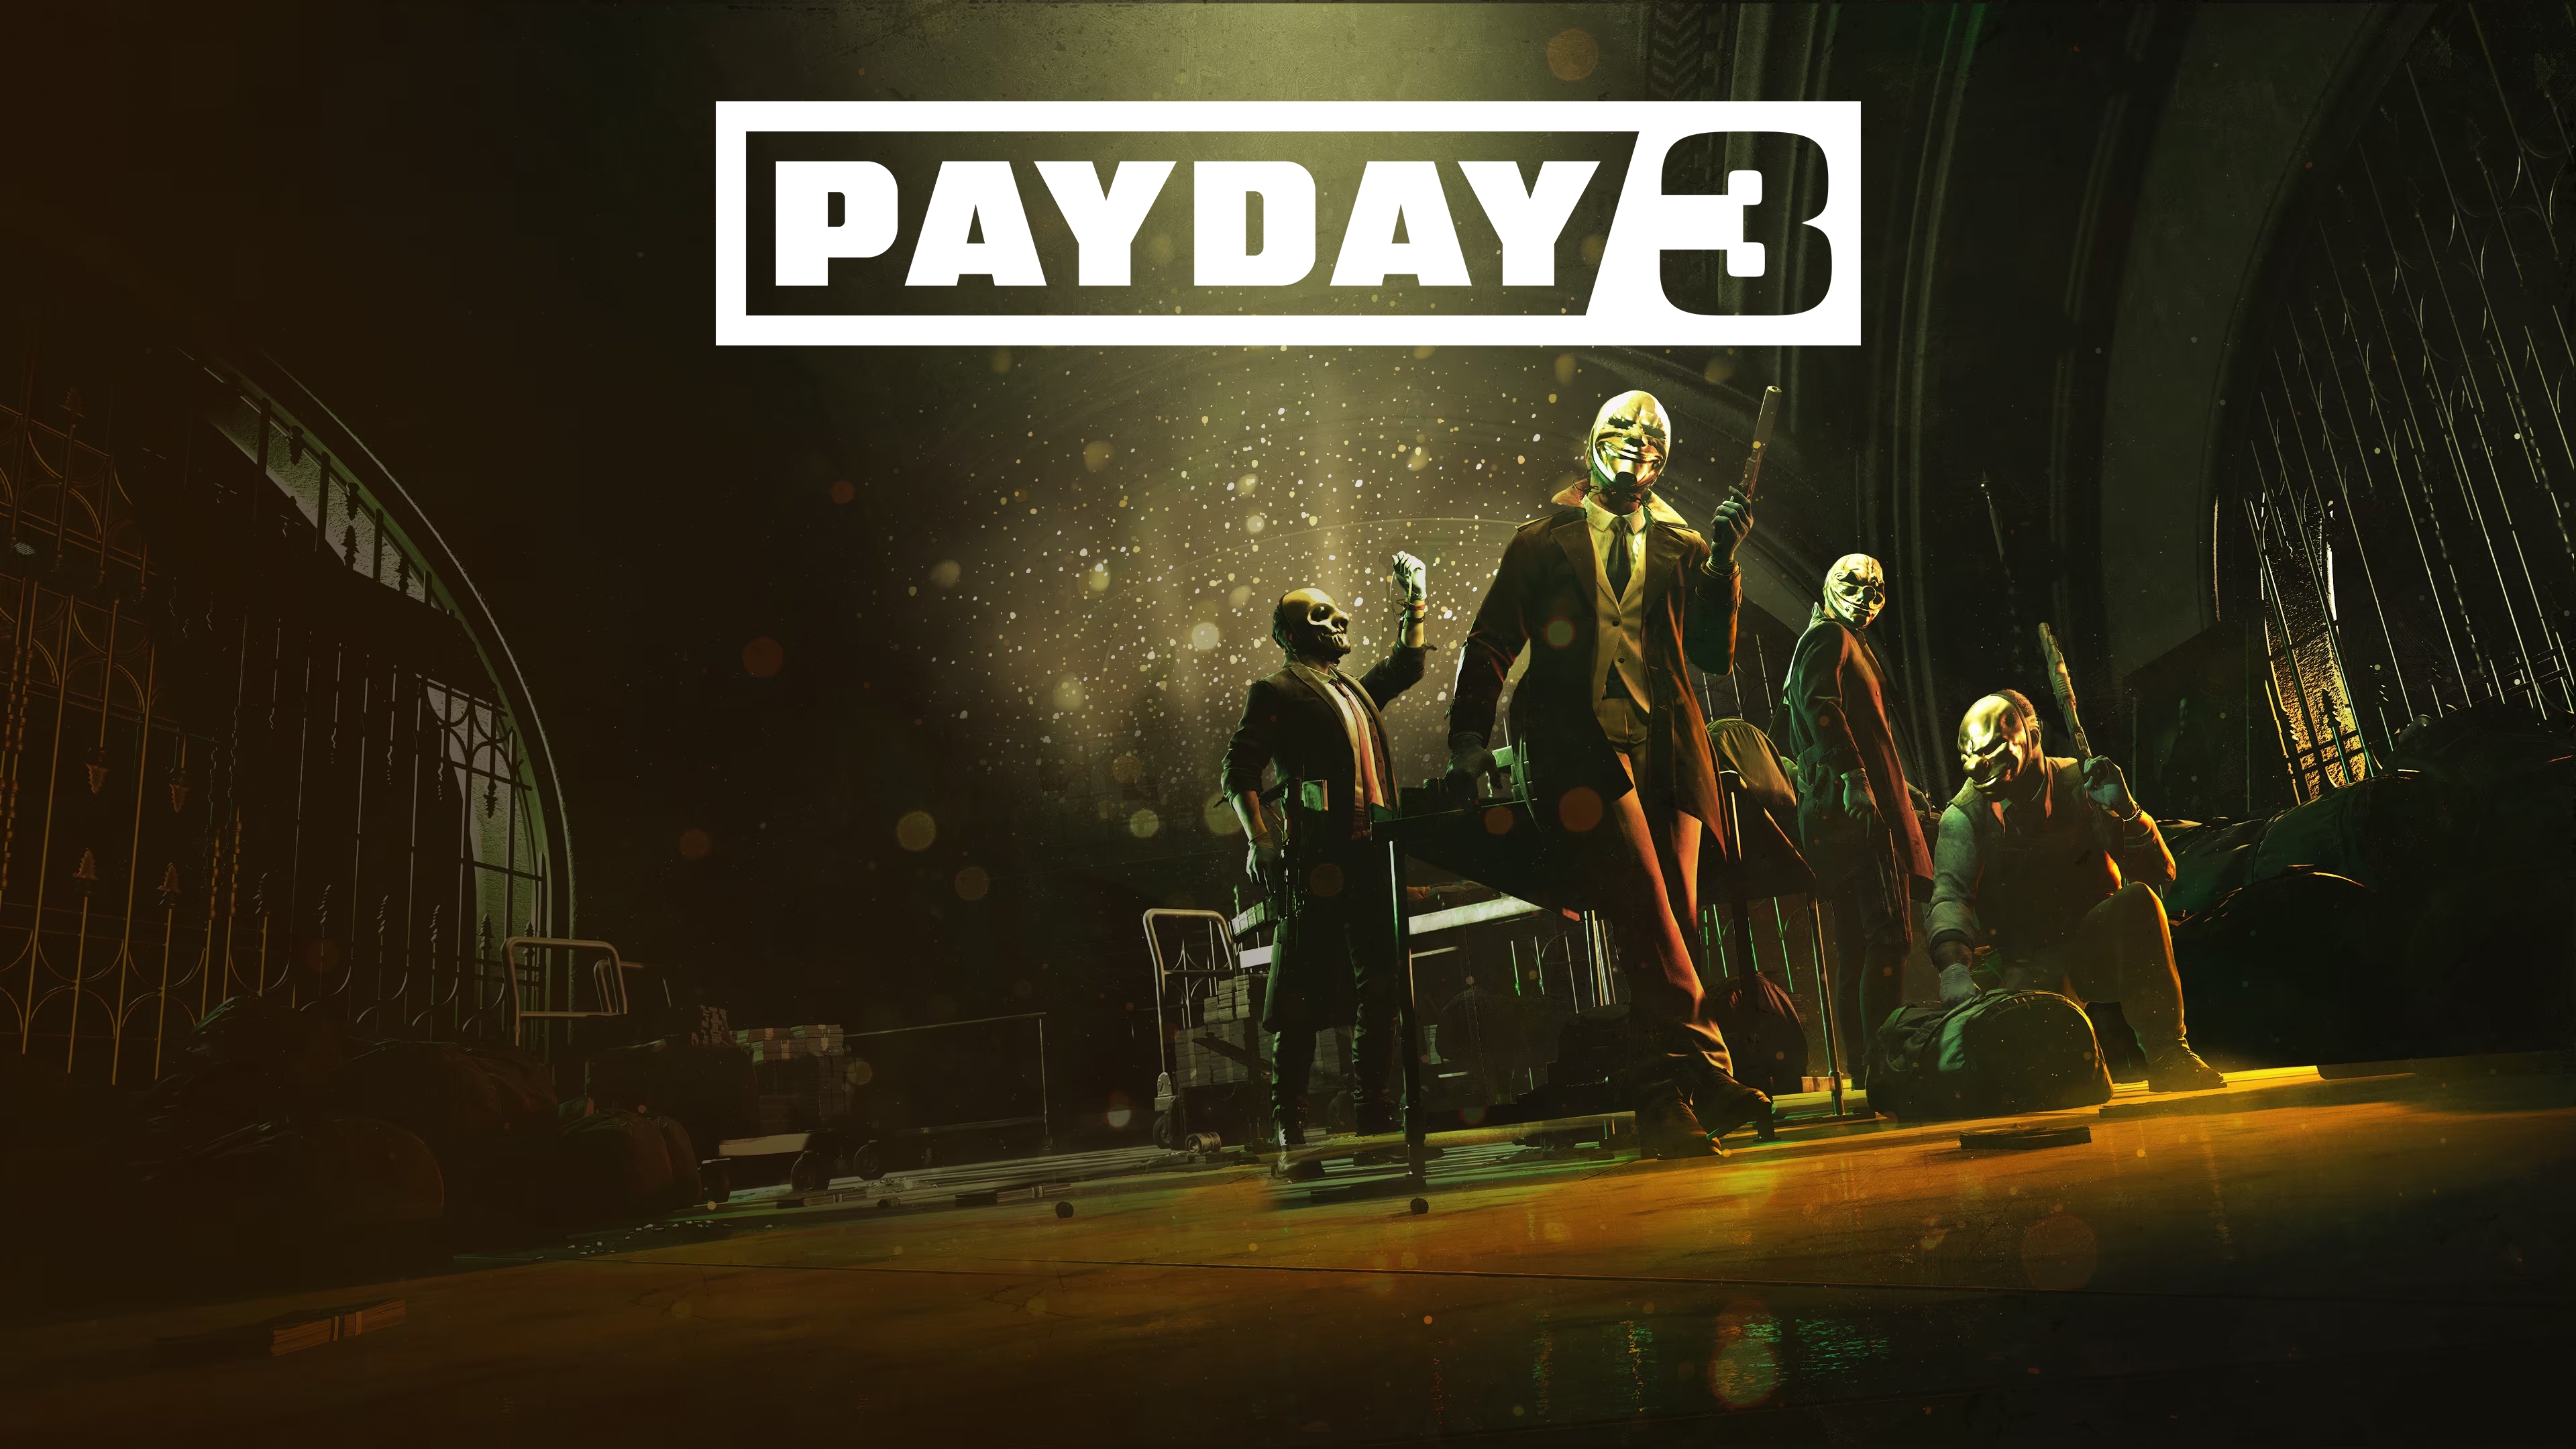 free download payday 2